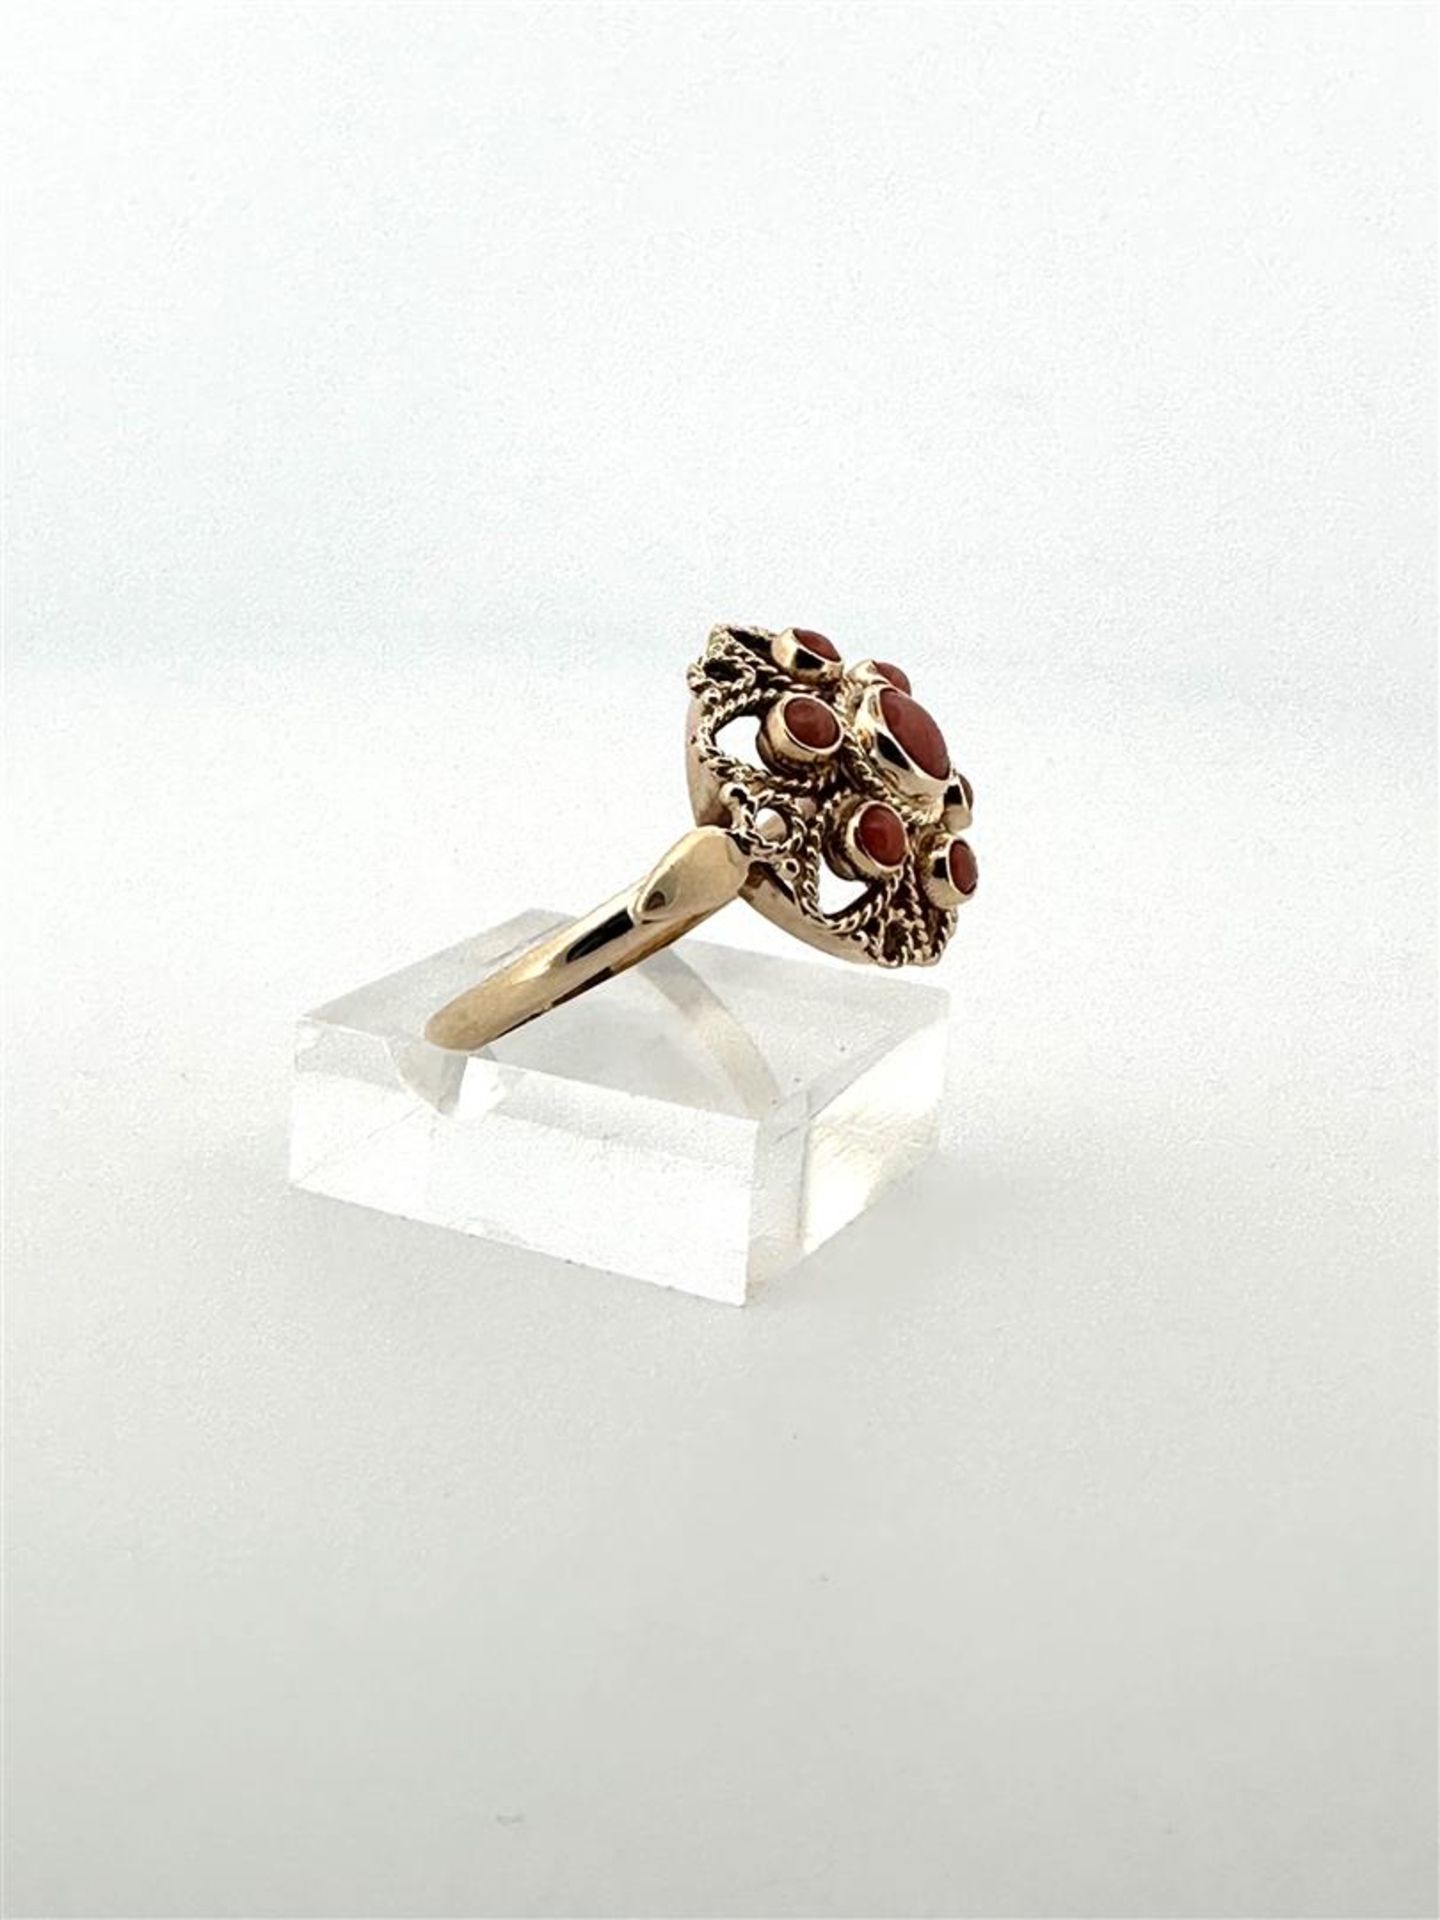 14kt rose gold rosette ring set with red coral.
The ring is gracefully finished with twisted wire an - Bild 2 aus 5